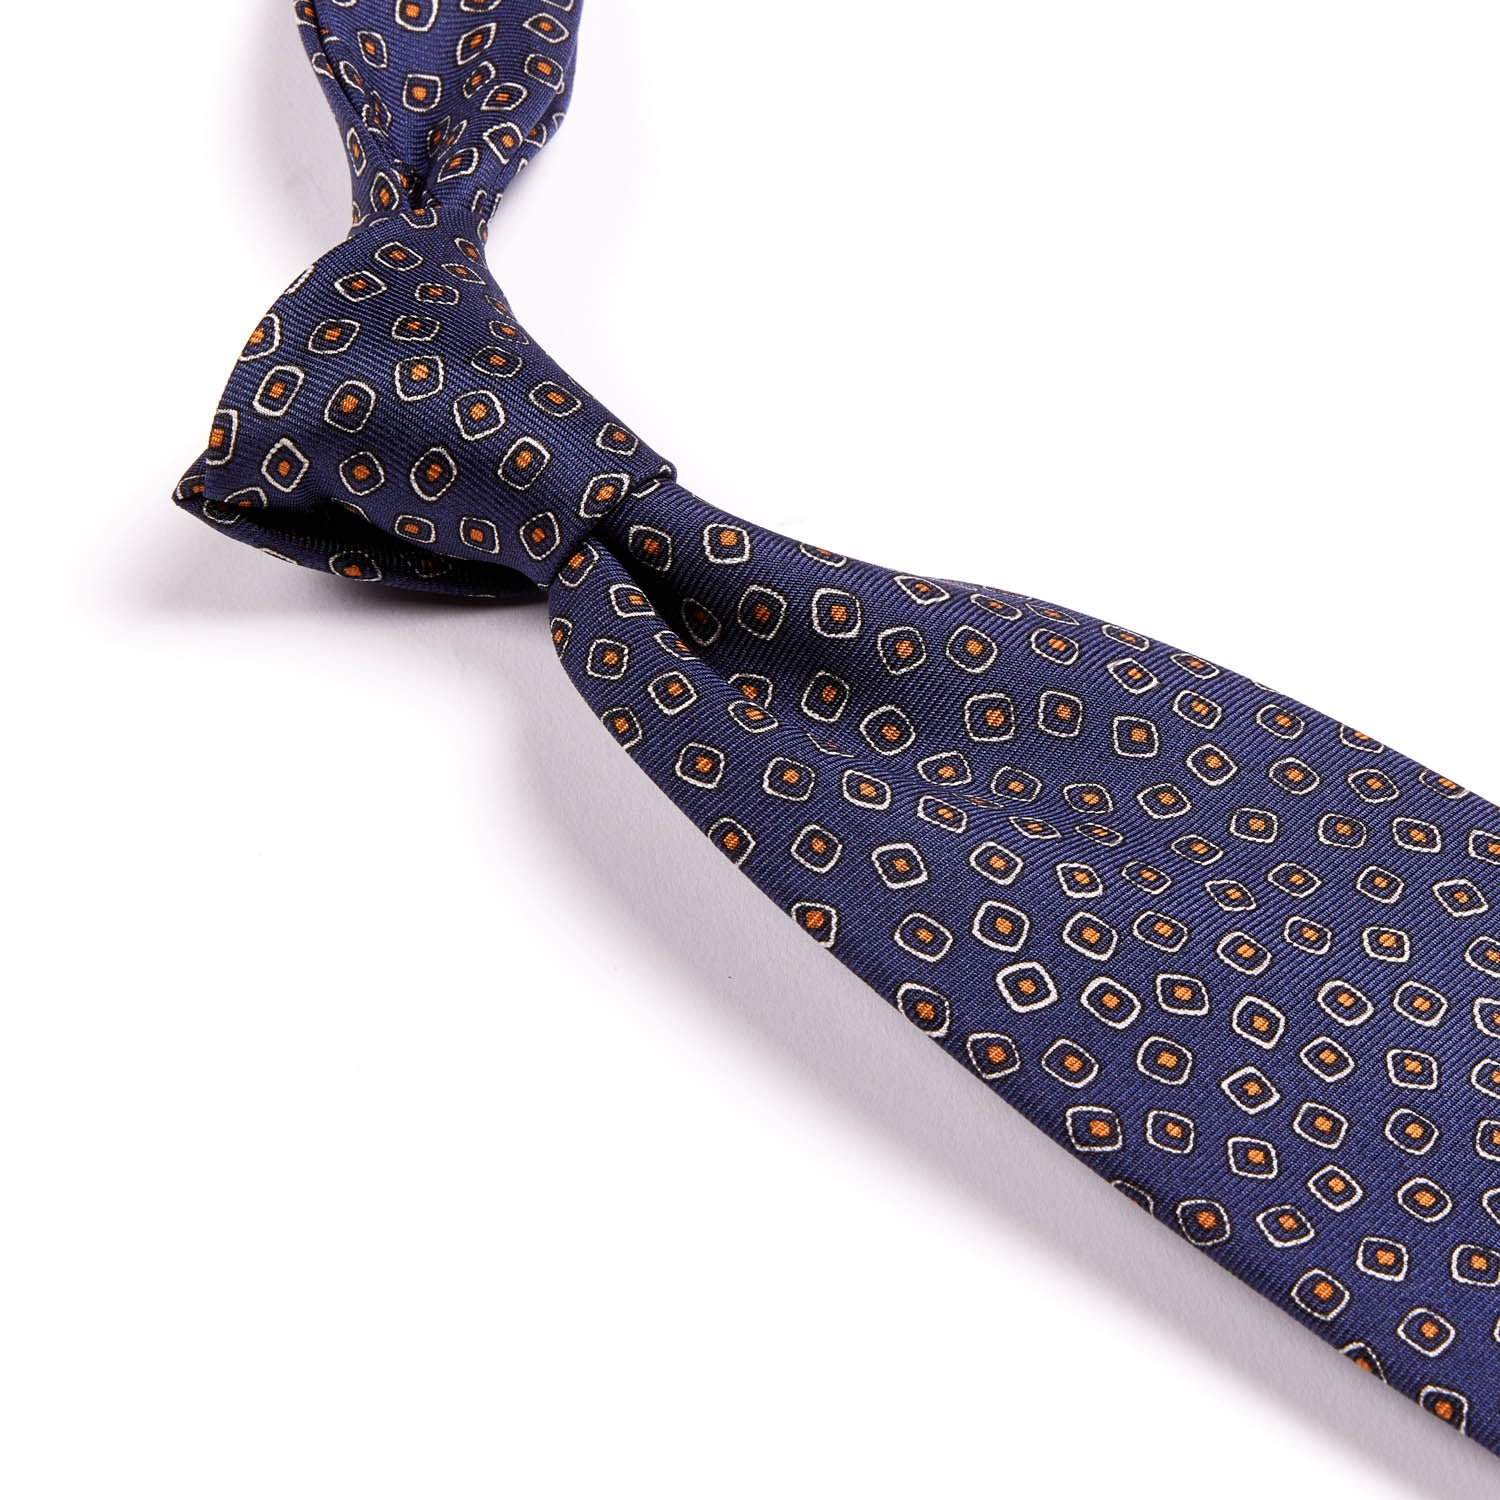 A Sovereign Grade Navy/White Eton Printed Silk Tie, 150cm from KirbyAllison.com, crafted from 100% English silk.